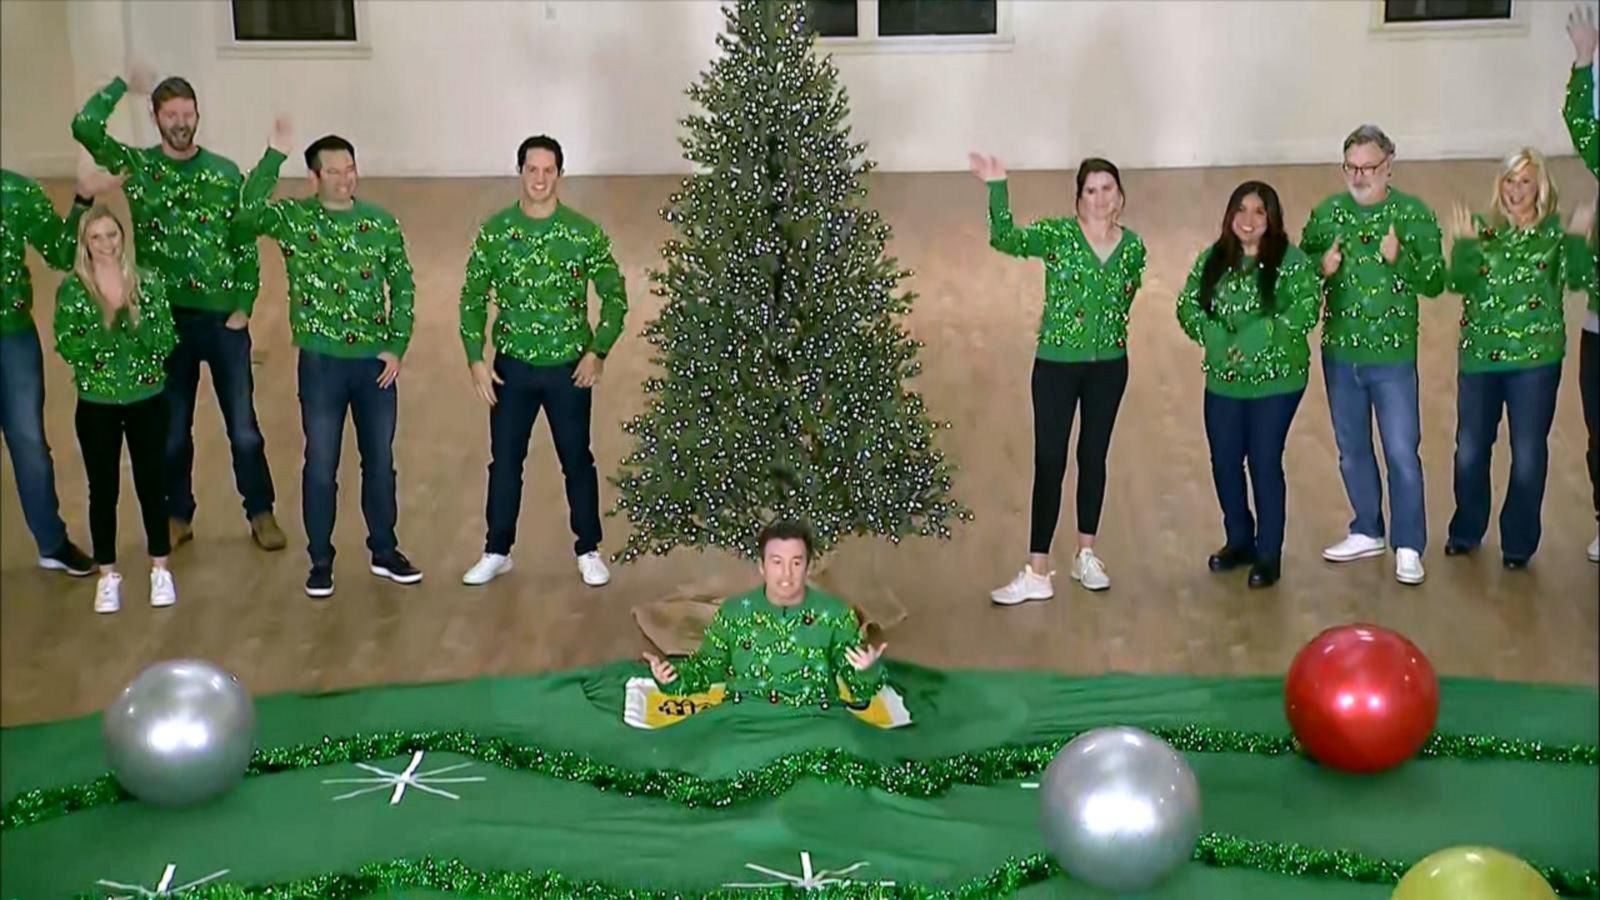 Cyber Monday: Save up to 65% off team ugly Christmas sweaters